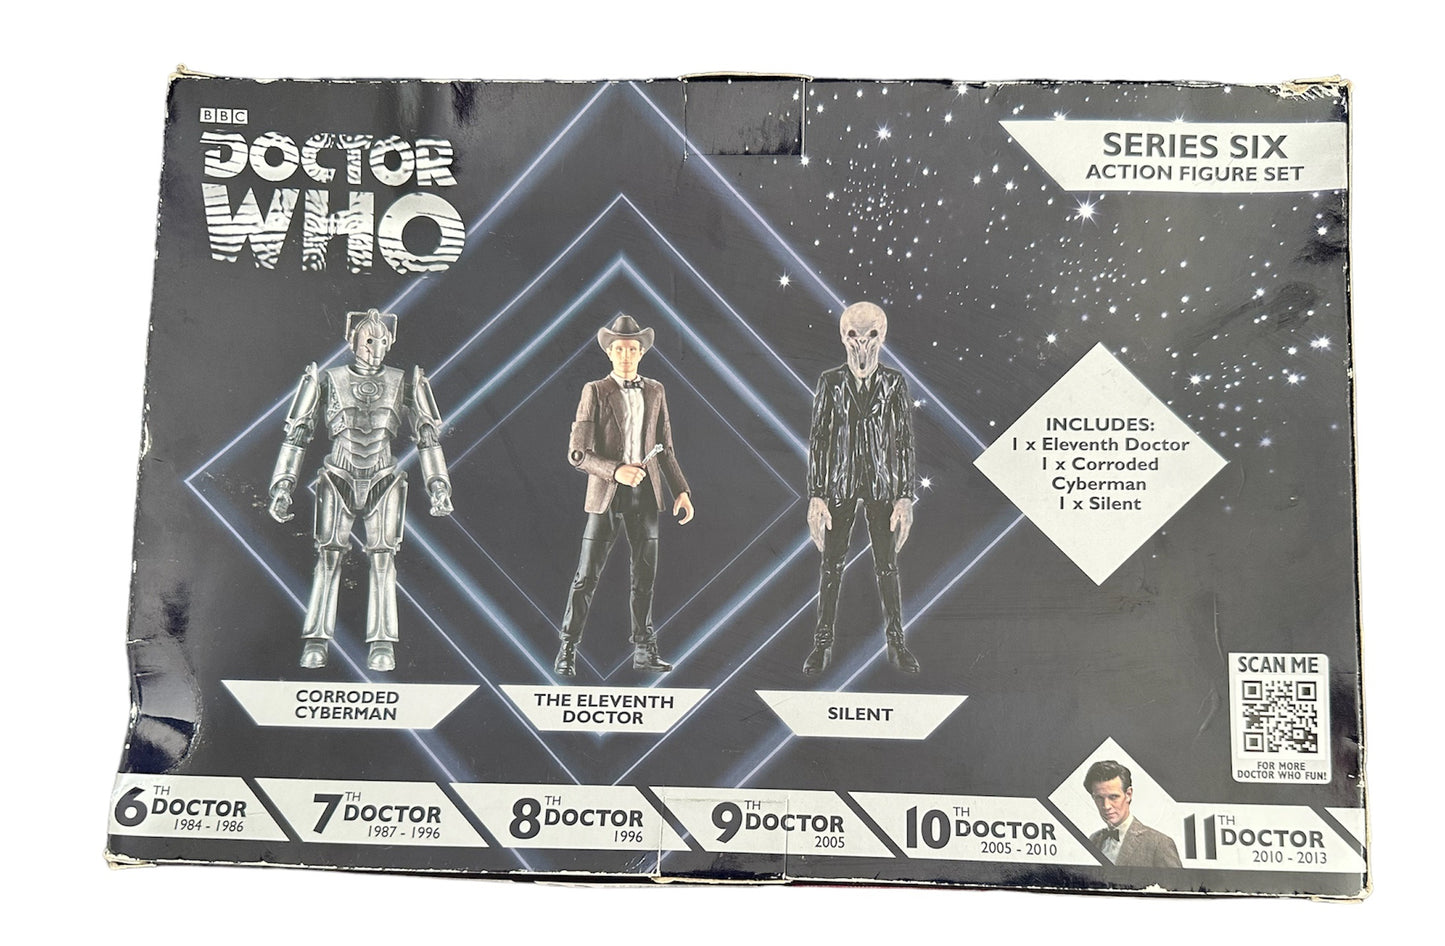 Dr Doctor Who Eleventh Doctor Series Six Action Figure set - Brand New Factory Sealed Shop Stock Room Find